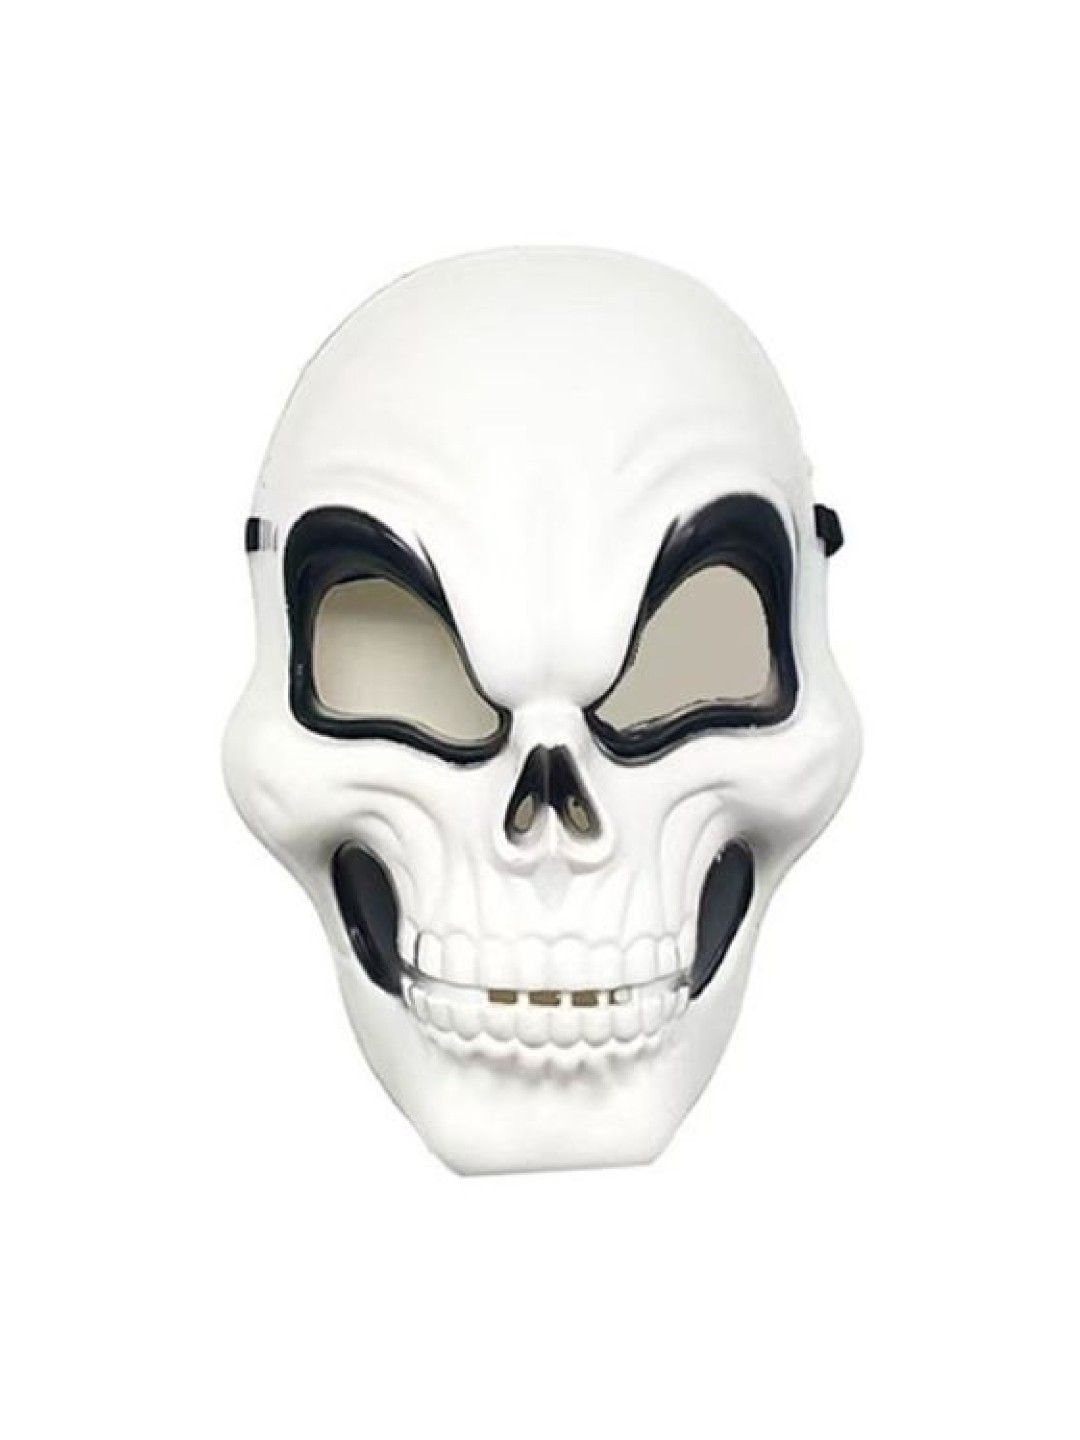 Elves of the Party Mask: Skull